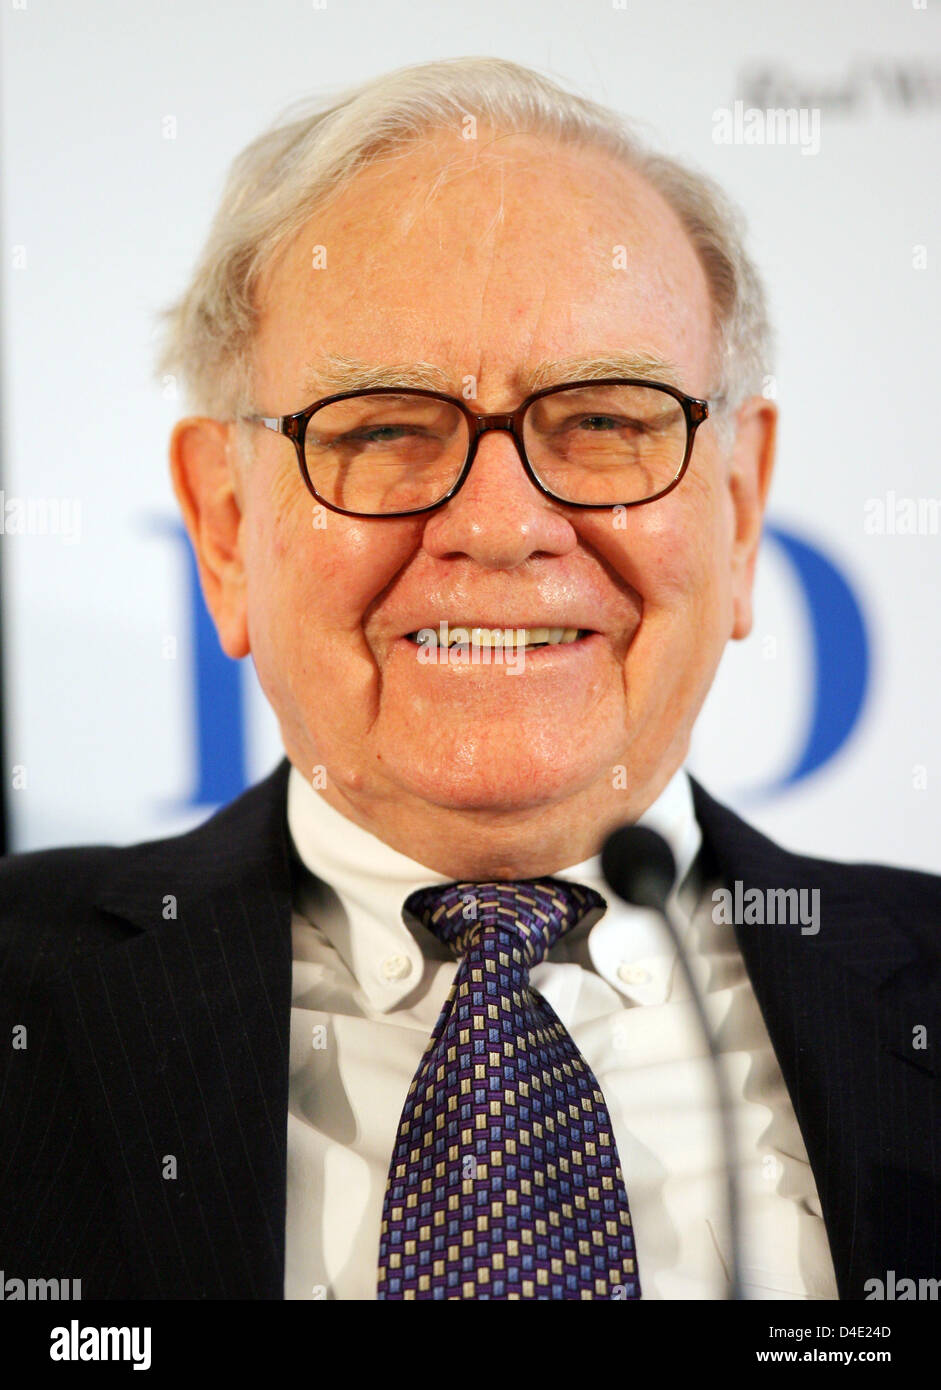 US-Investor Warren Buffett gives a press conference in Frankfurt Main, Germany, 19 May 2008. His Berkshire Hathaway holding wants to invest in German family companies in the near future. So far Berkshire Hathaway has concentrated mainly on large US companies such as Coca Cola. Photo: ARNE DEDERT Stock Photo